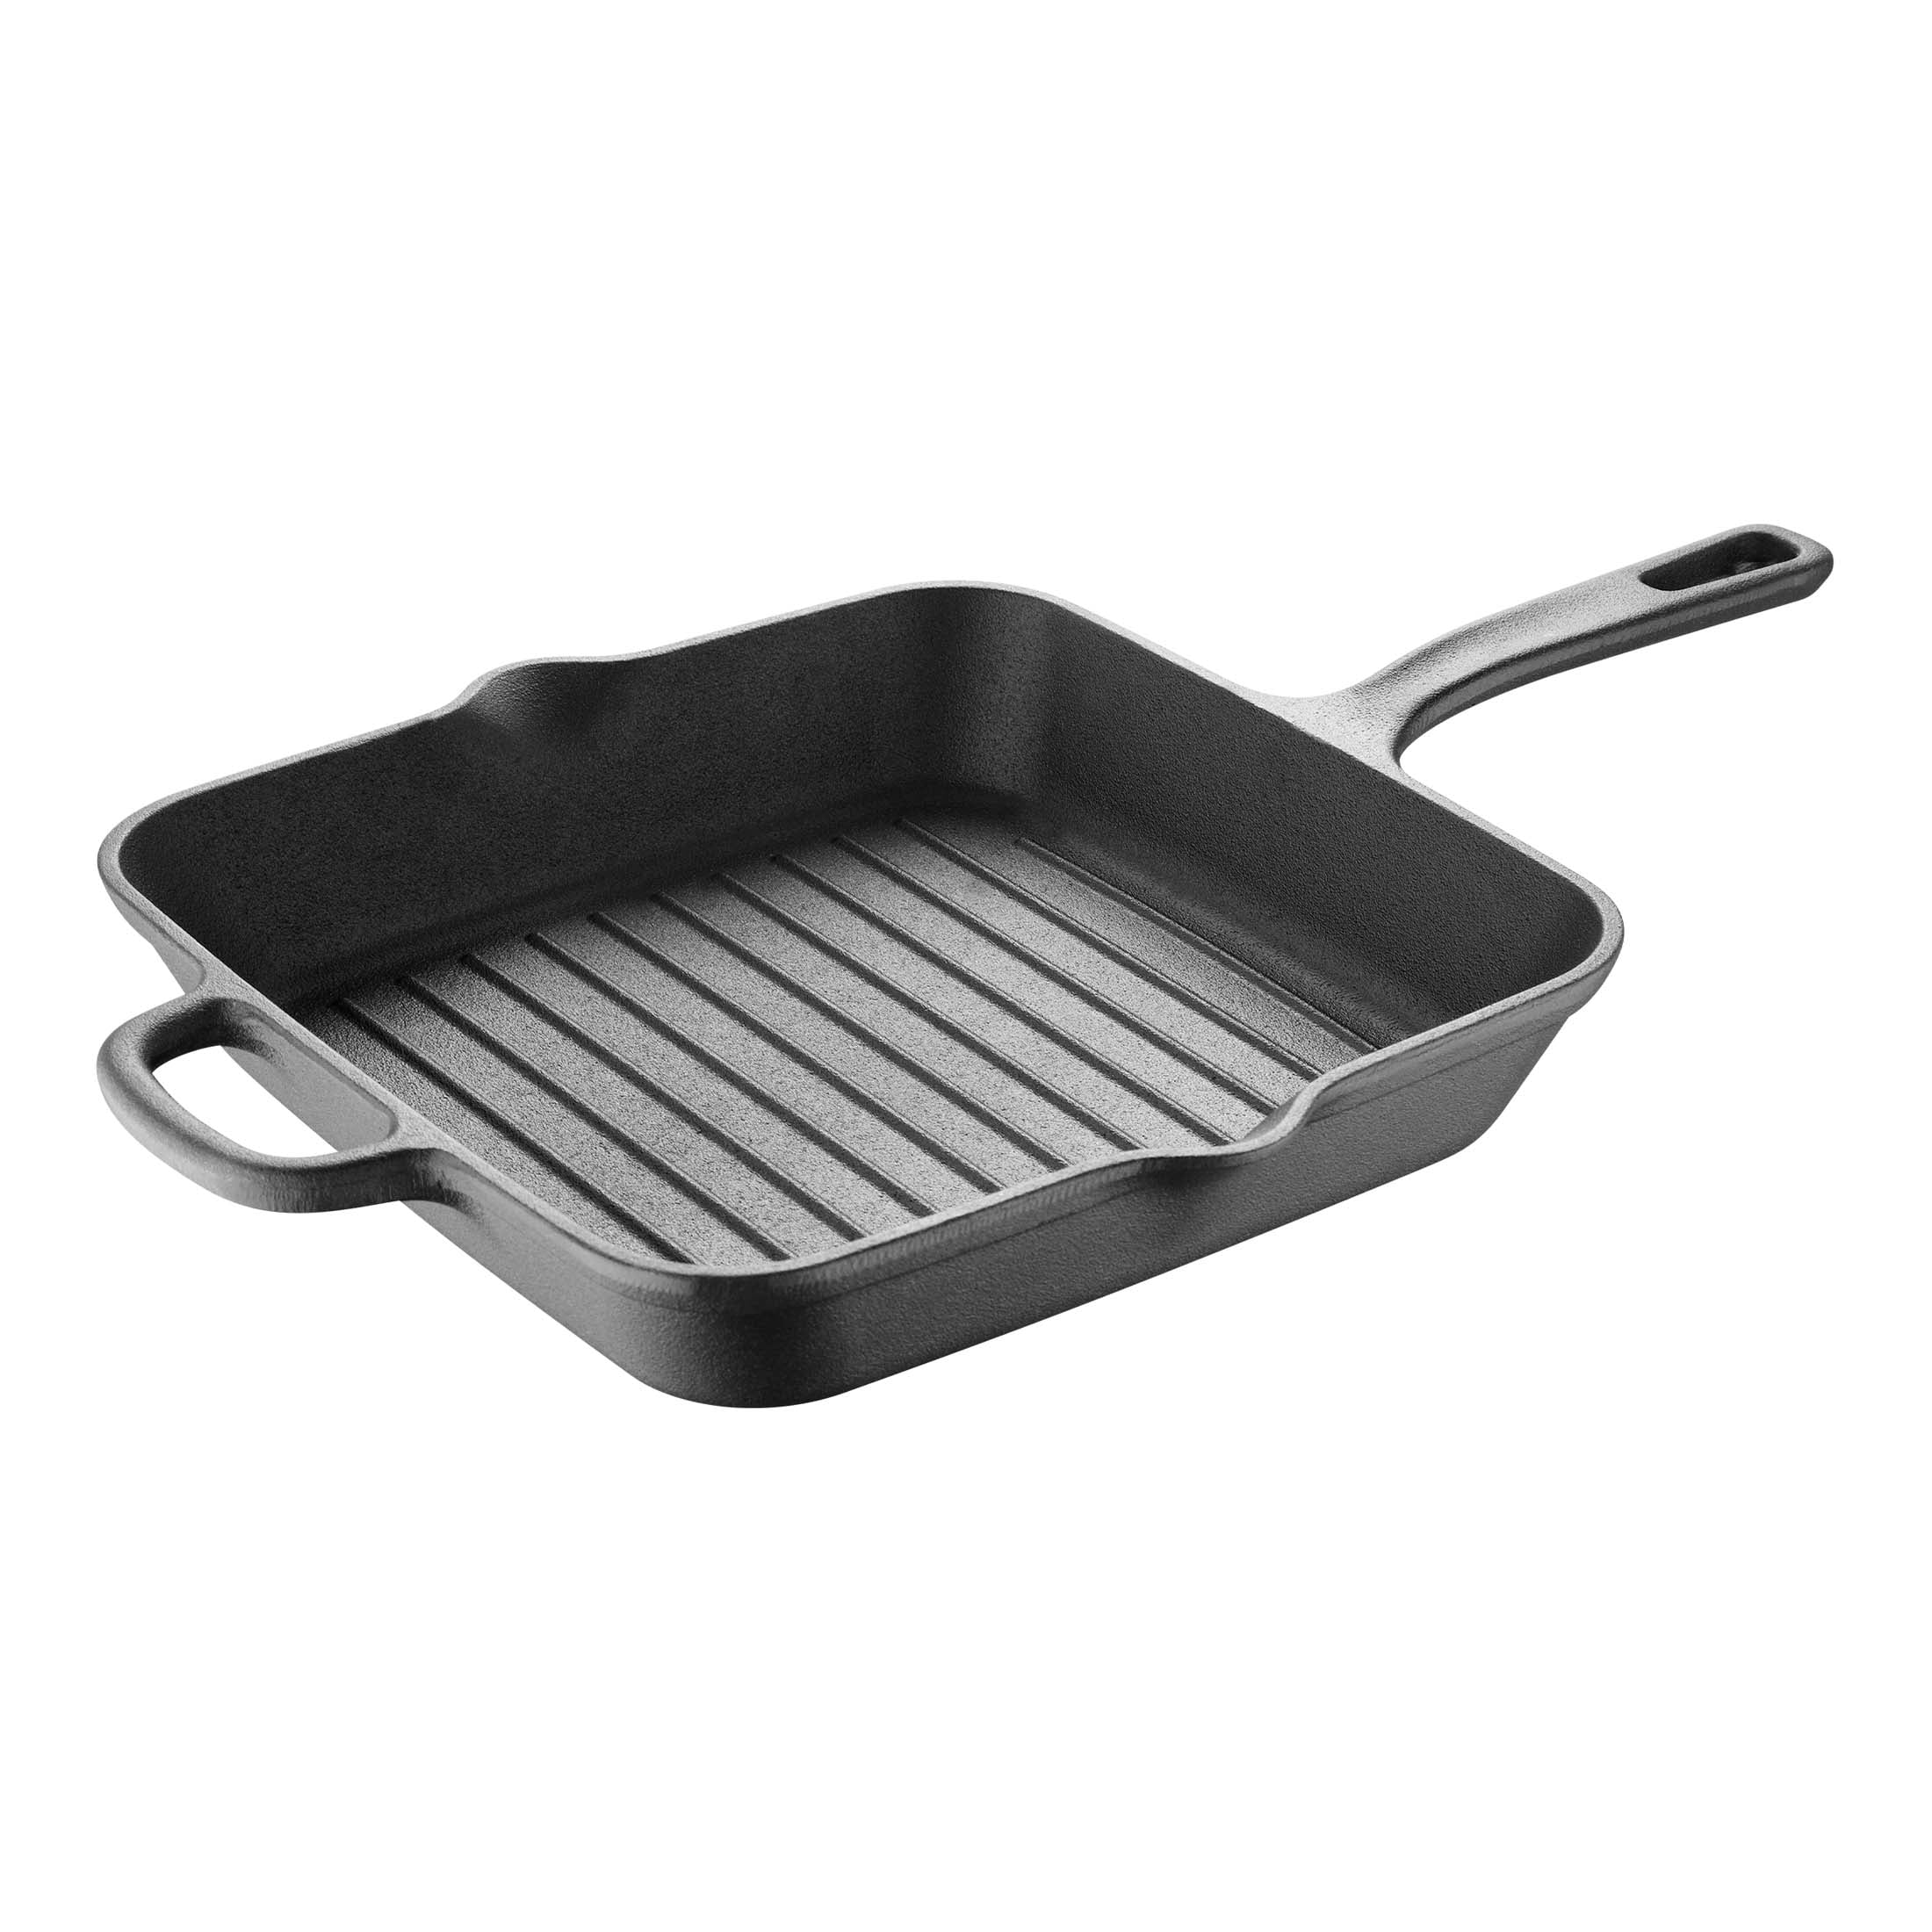 Small Square Enamelled Grill Pan Tray Rack & Handle for Bush Oven Cooker 